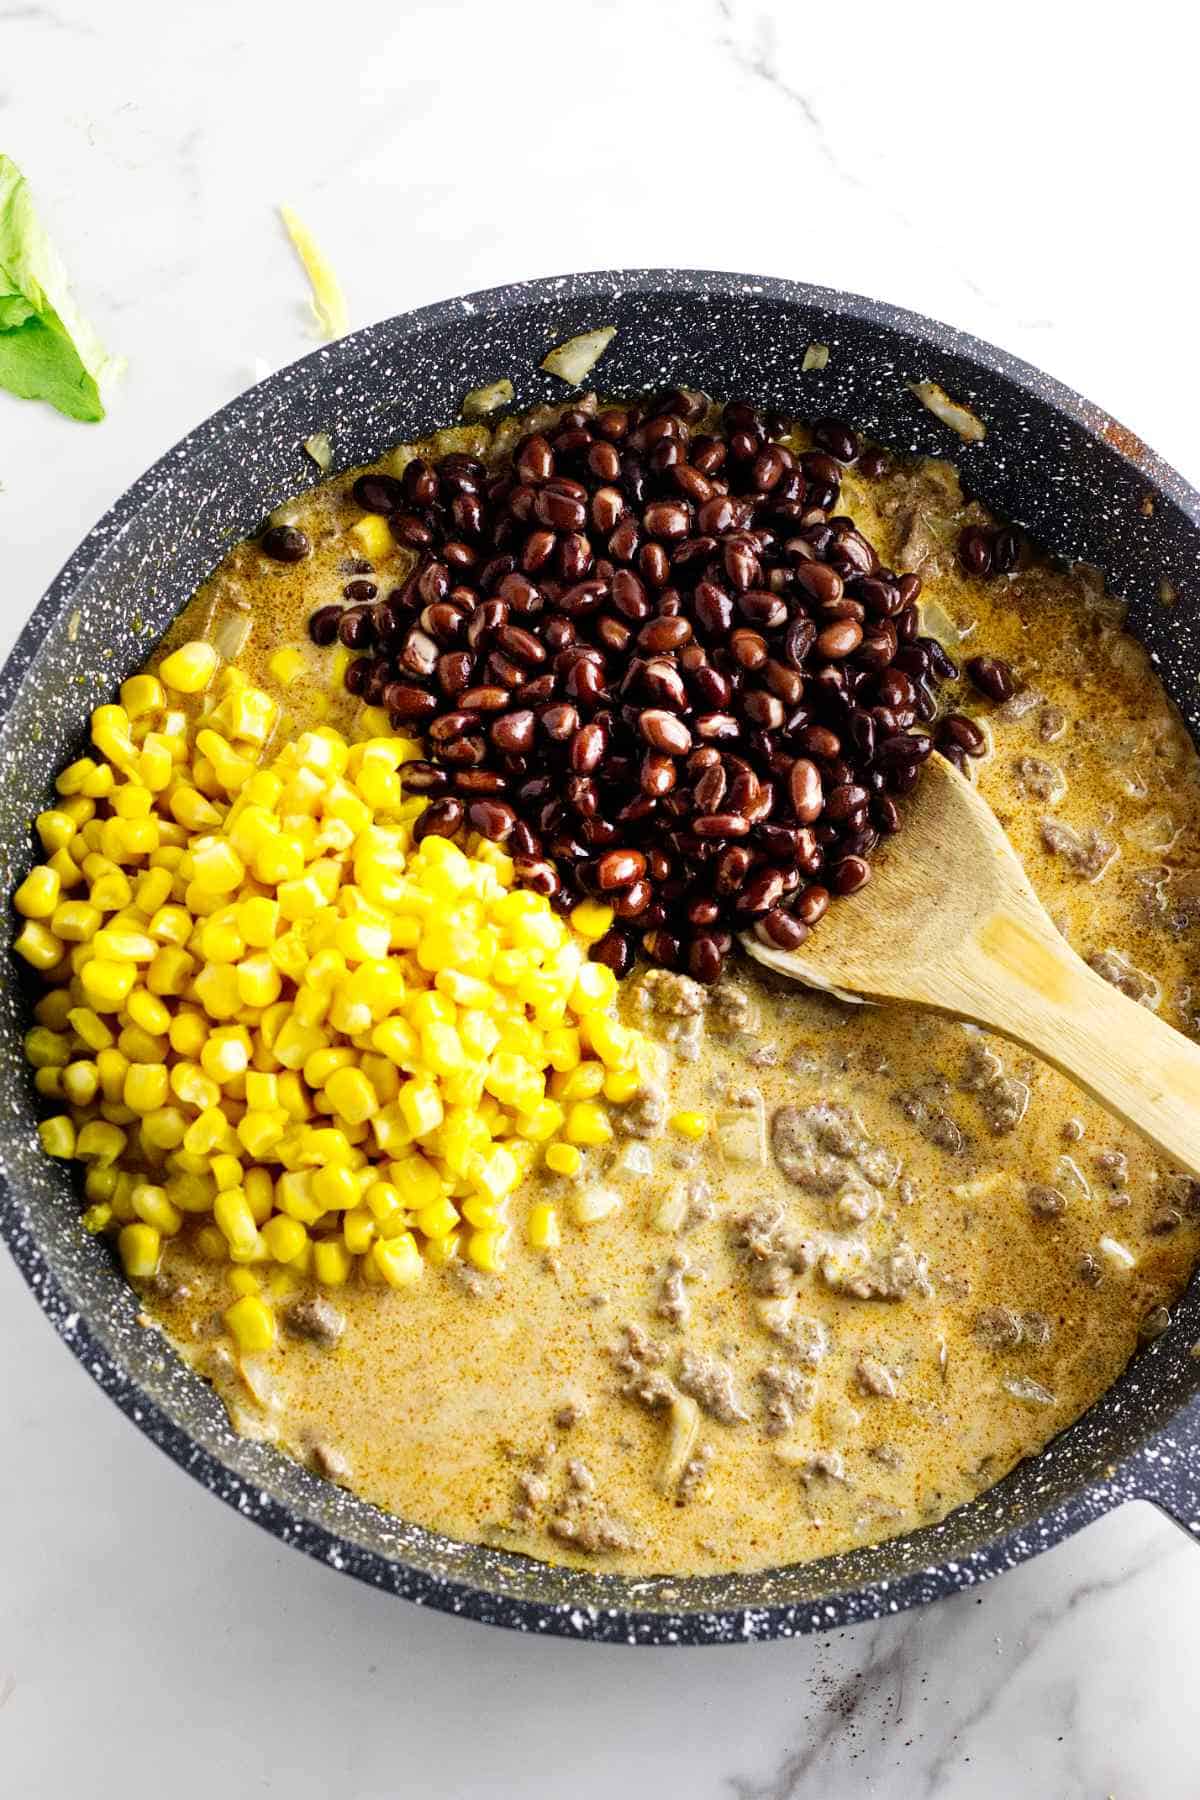 corn kernels and black black beans added to ground beef mixture.